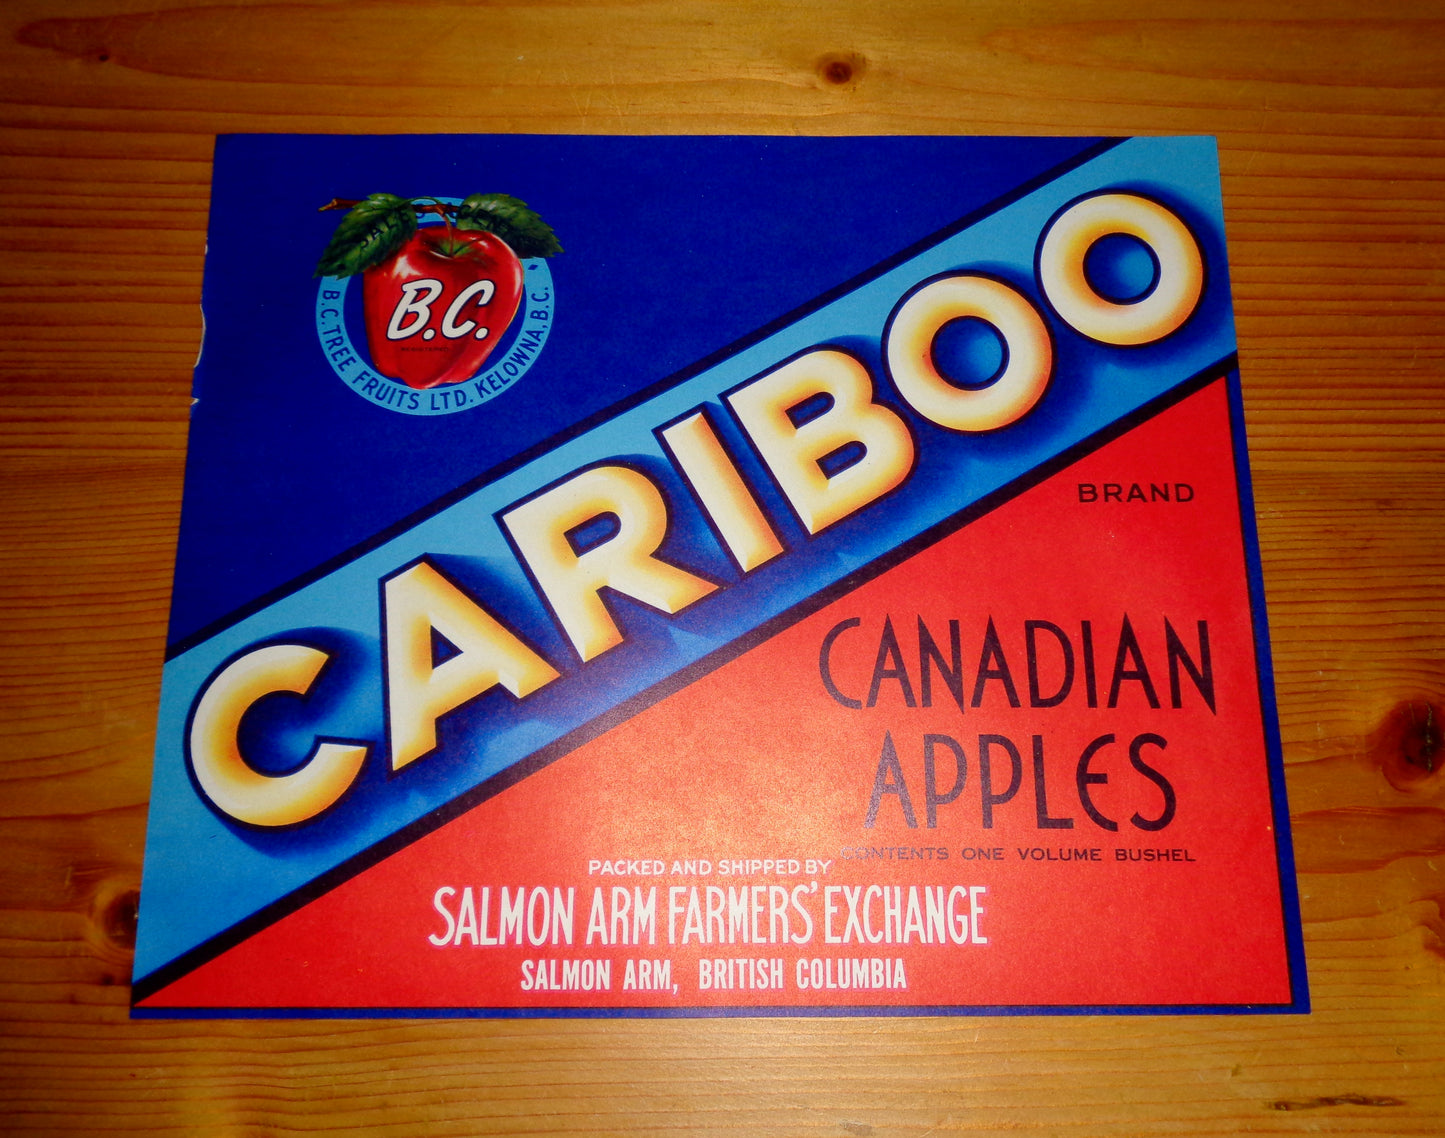 Vintage Original Fruit Crate Labels For Cariboo Apples and Trout Wenoka Apples